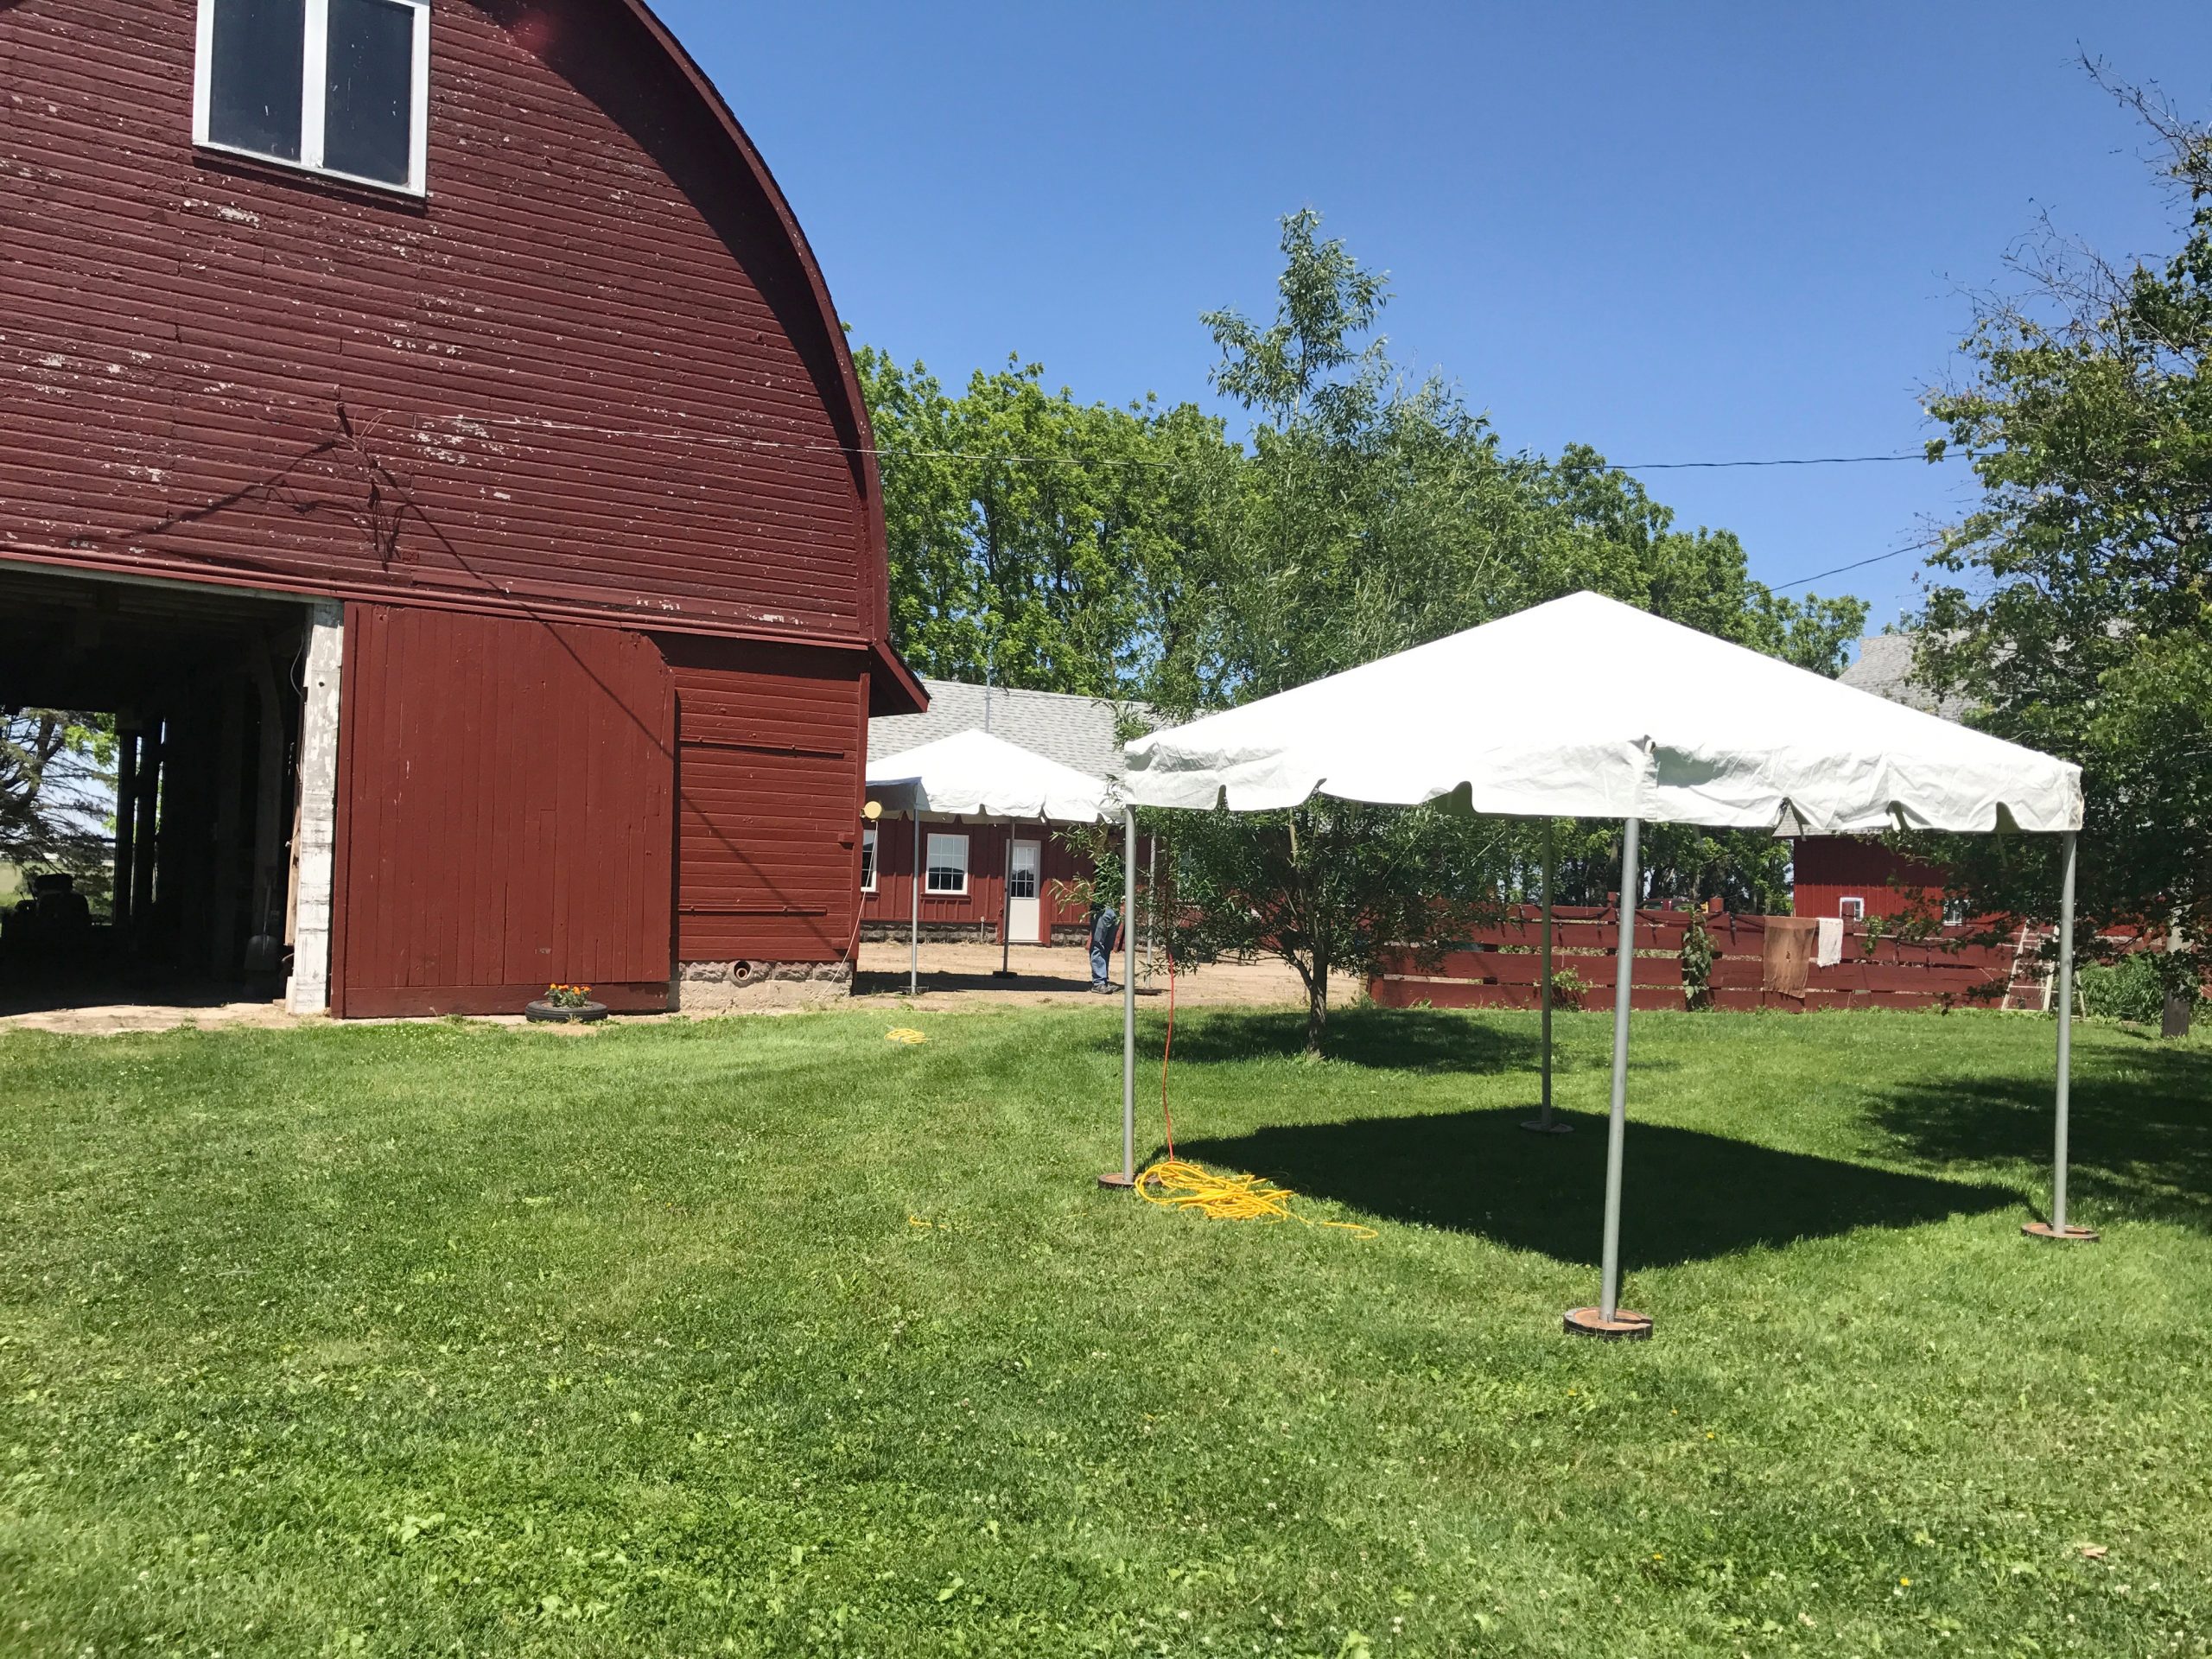 10' x 10' frame tent by a red barn in New Liberty Road, Walcott, IA